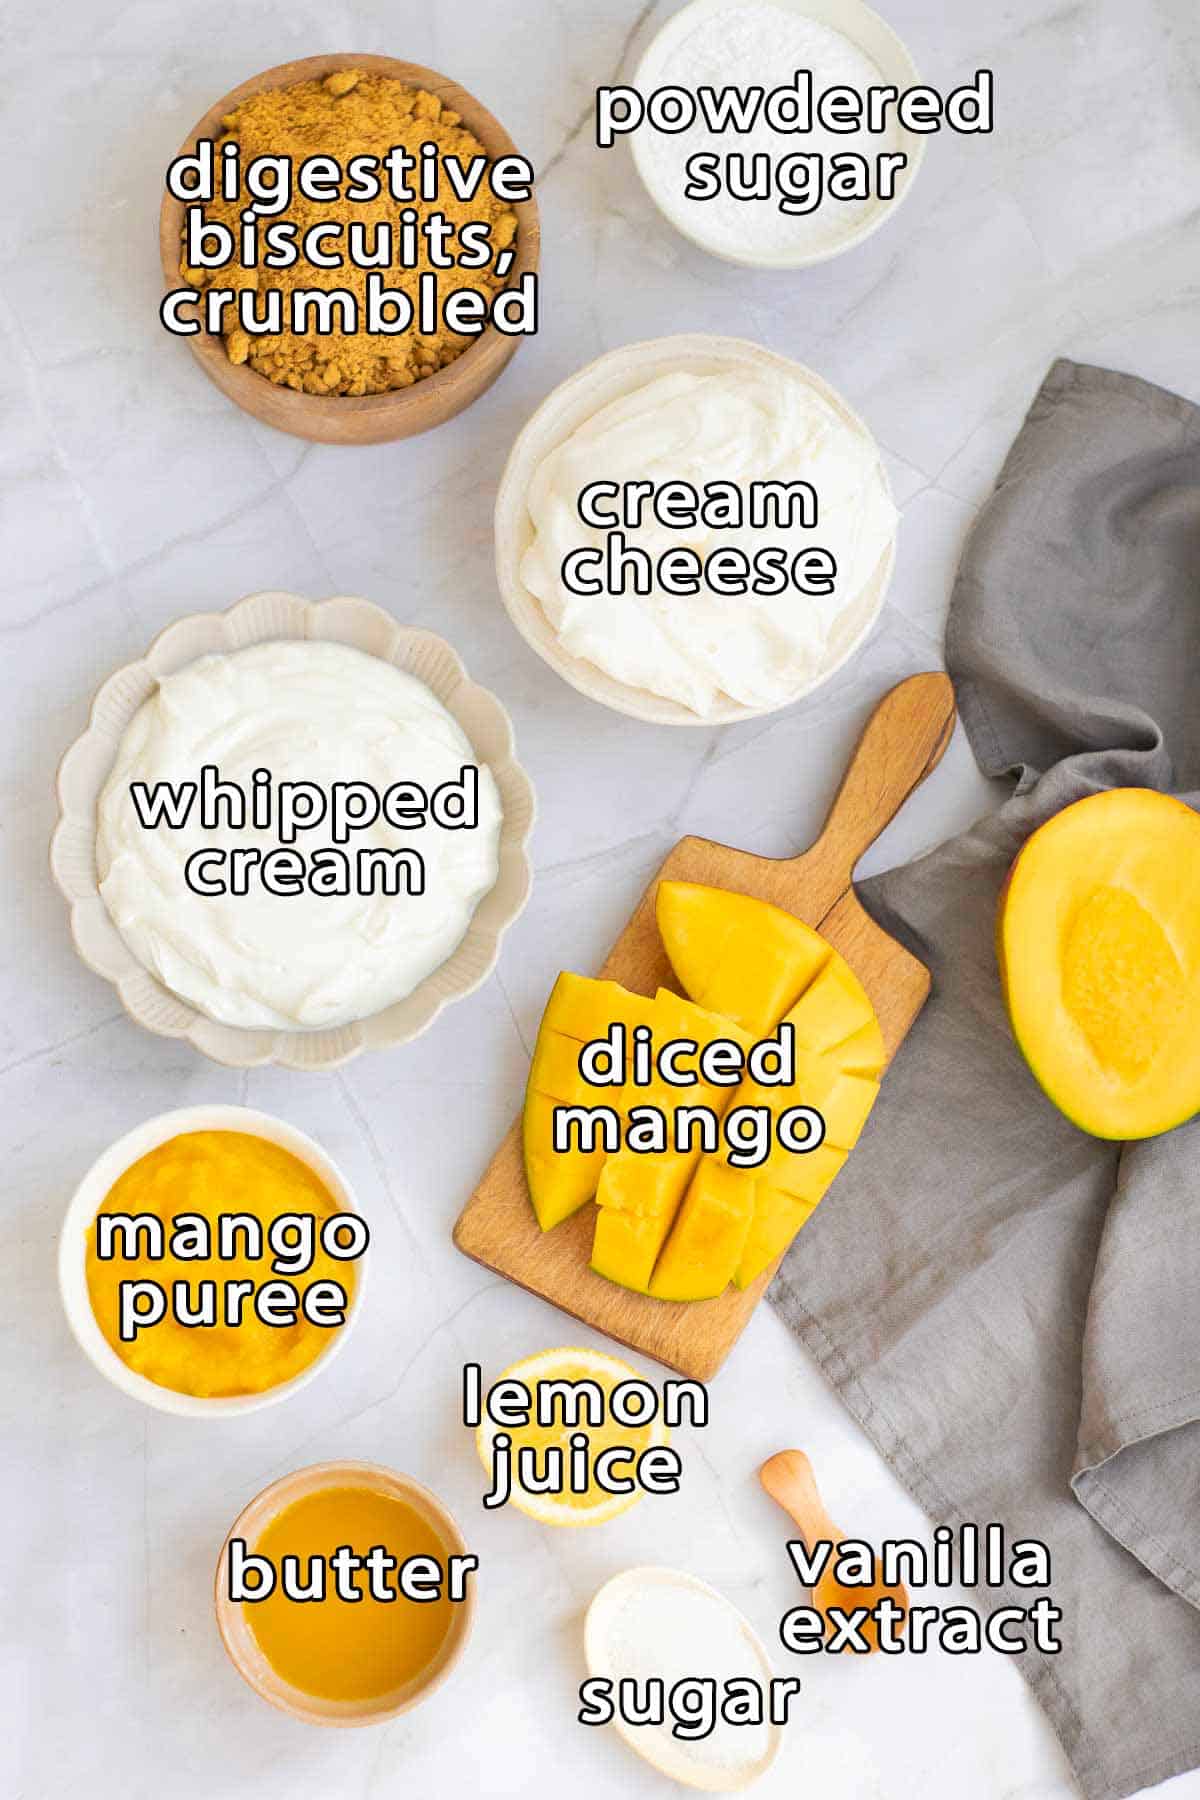 Overhead shot of ingredients - digestive biscuits crumbled, powdered sugar, cream cheese, whipped cream, diced mango, mango puree, butter, lemon juice, sugar, and vanilla extract.